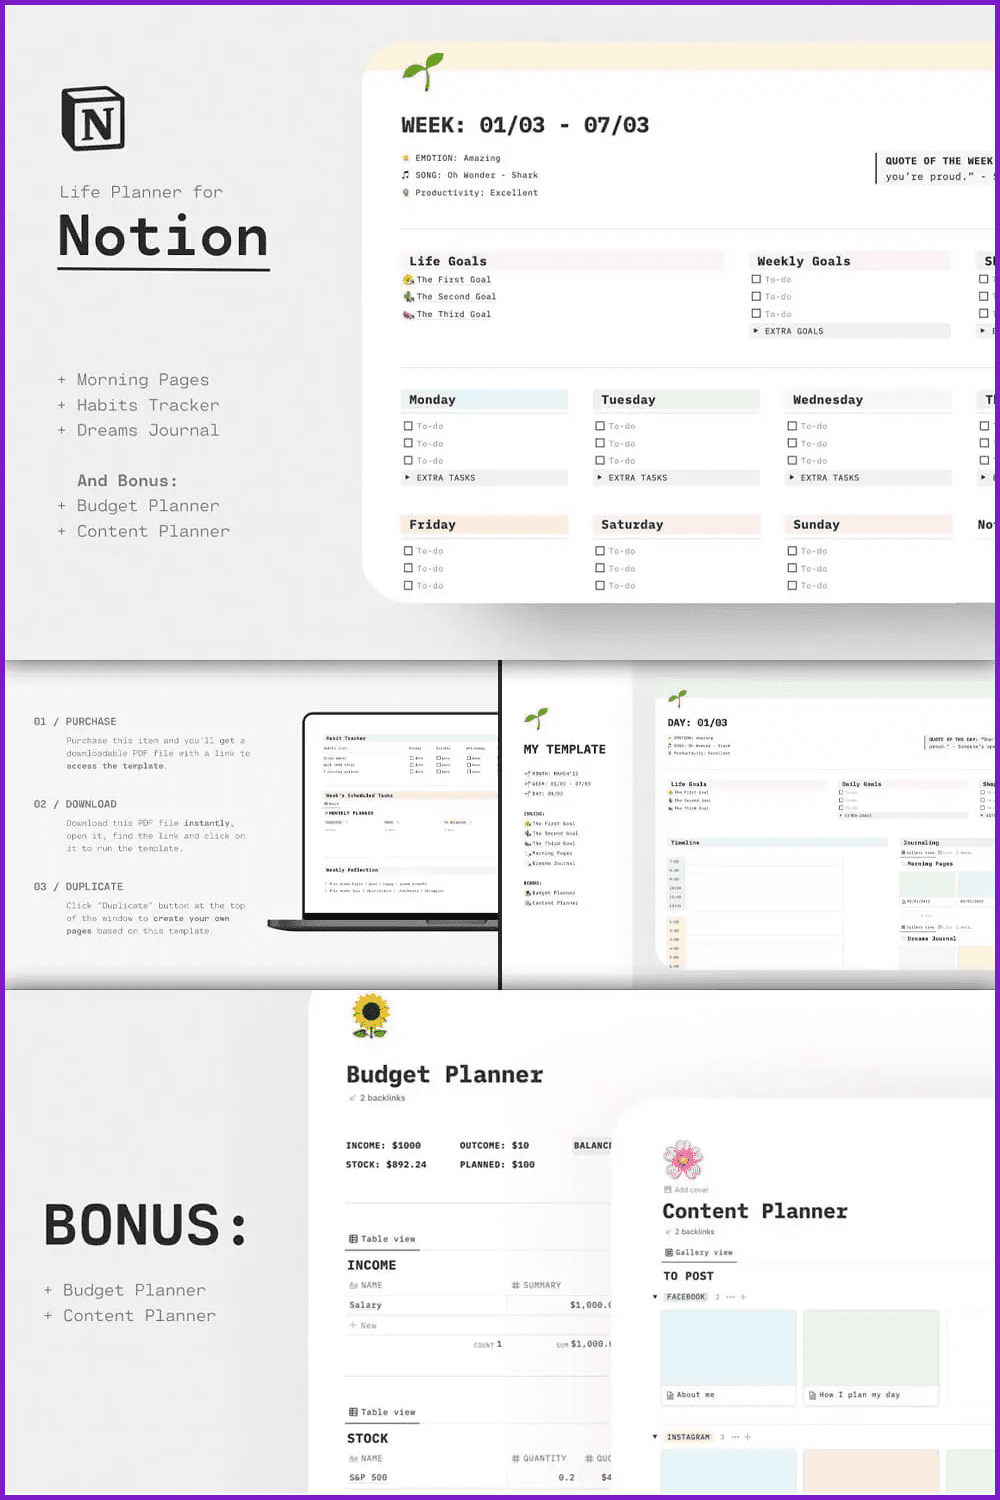 Lifestyle Planner / Notion Template.